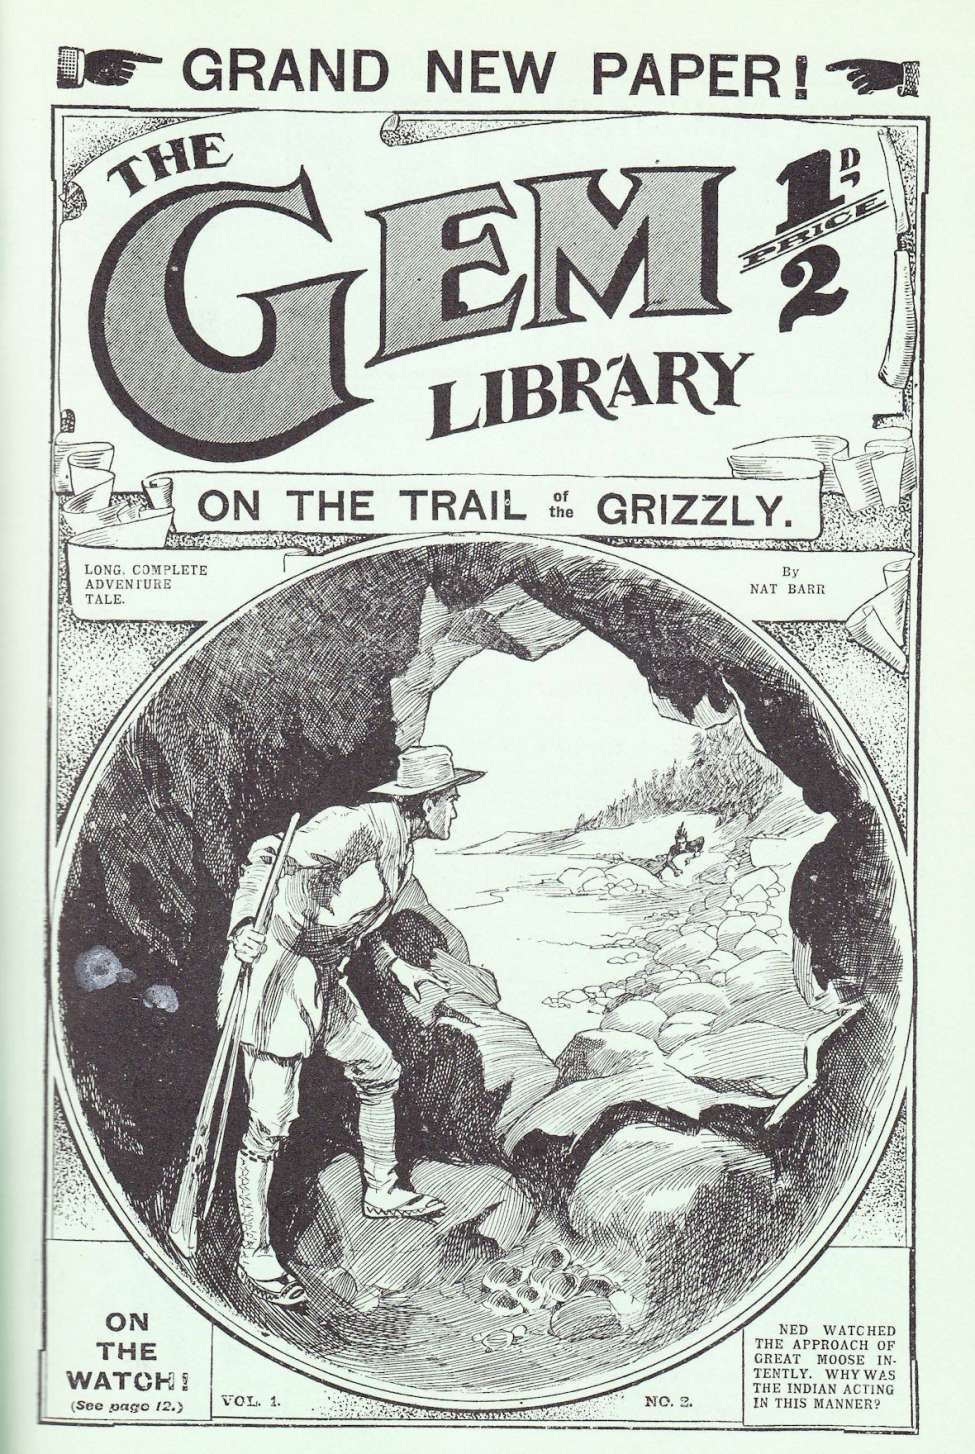 Book Cover For The Gem v1 2 - On the Trail of the Grizzly